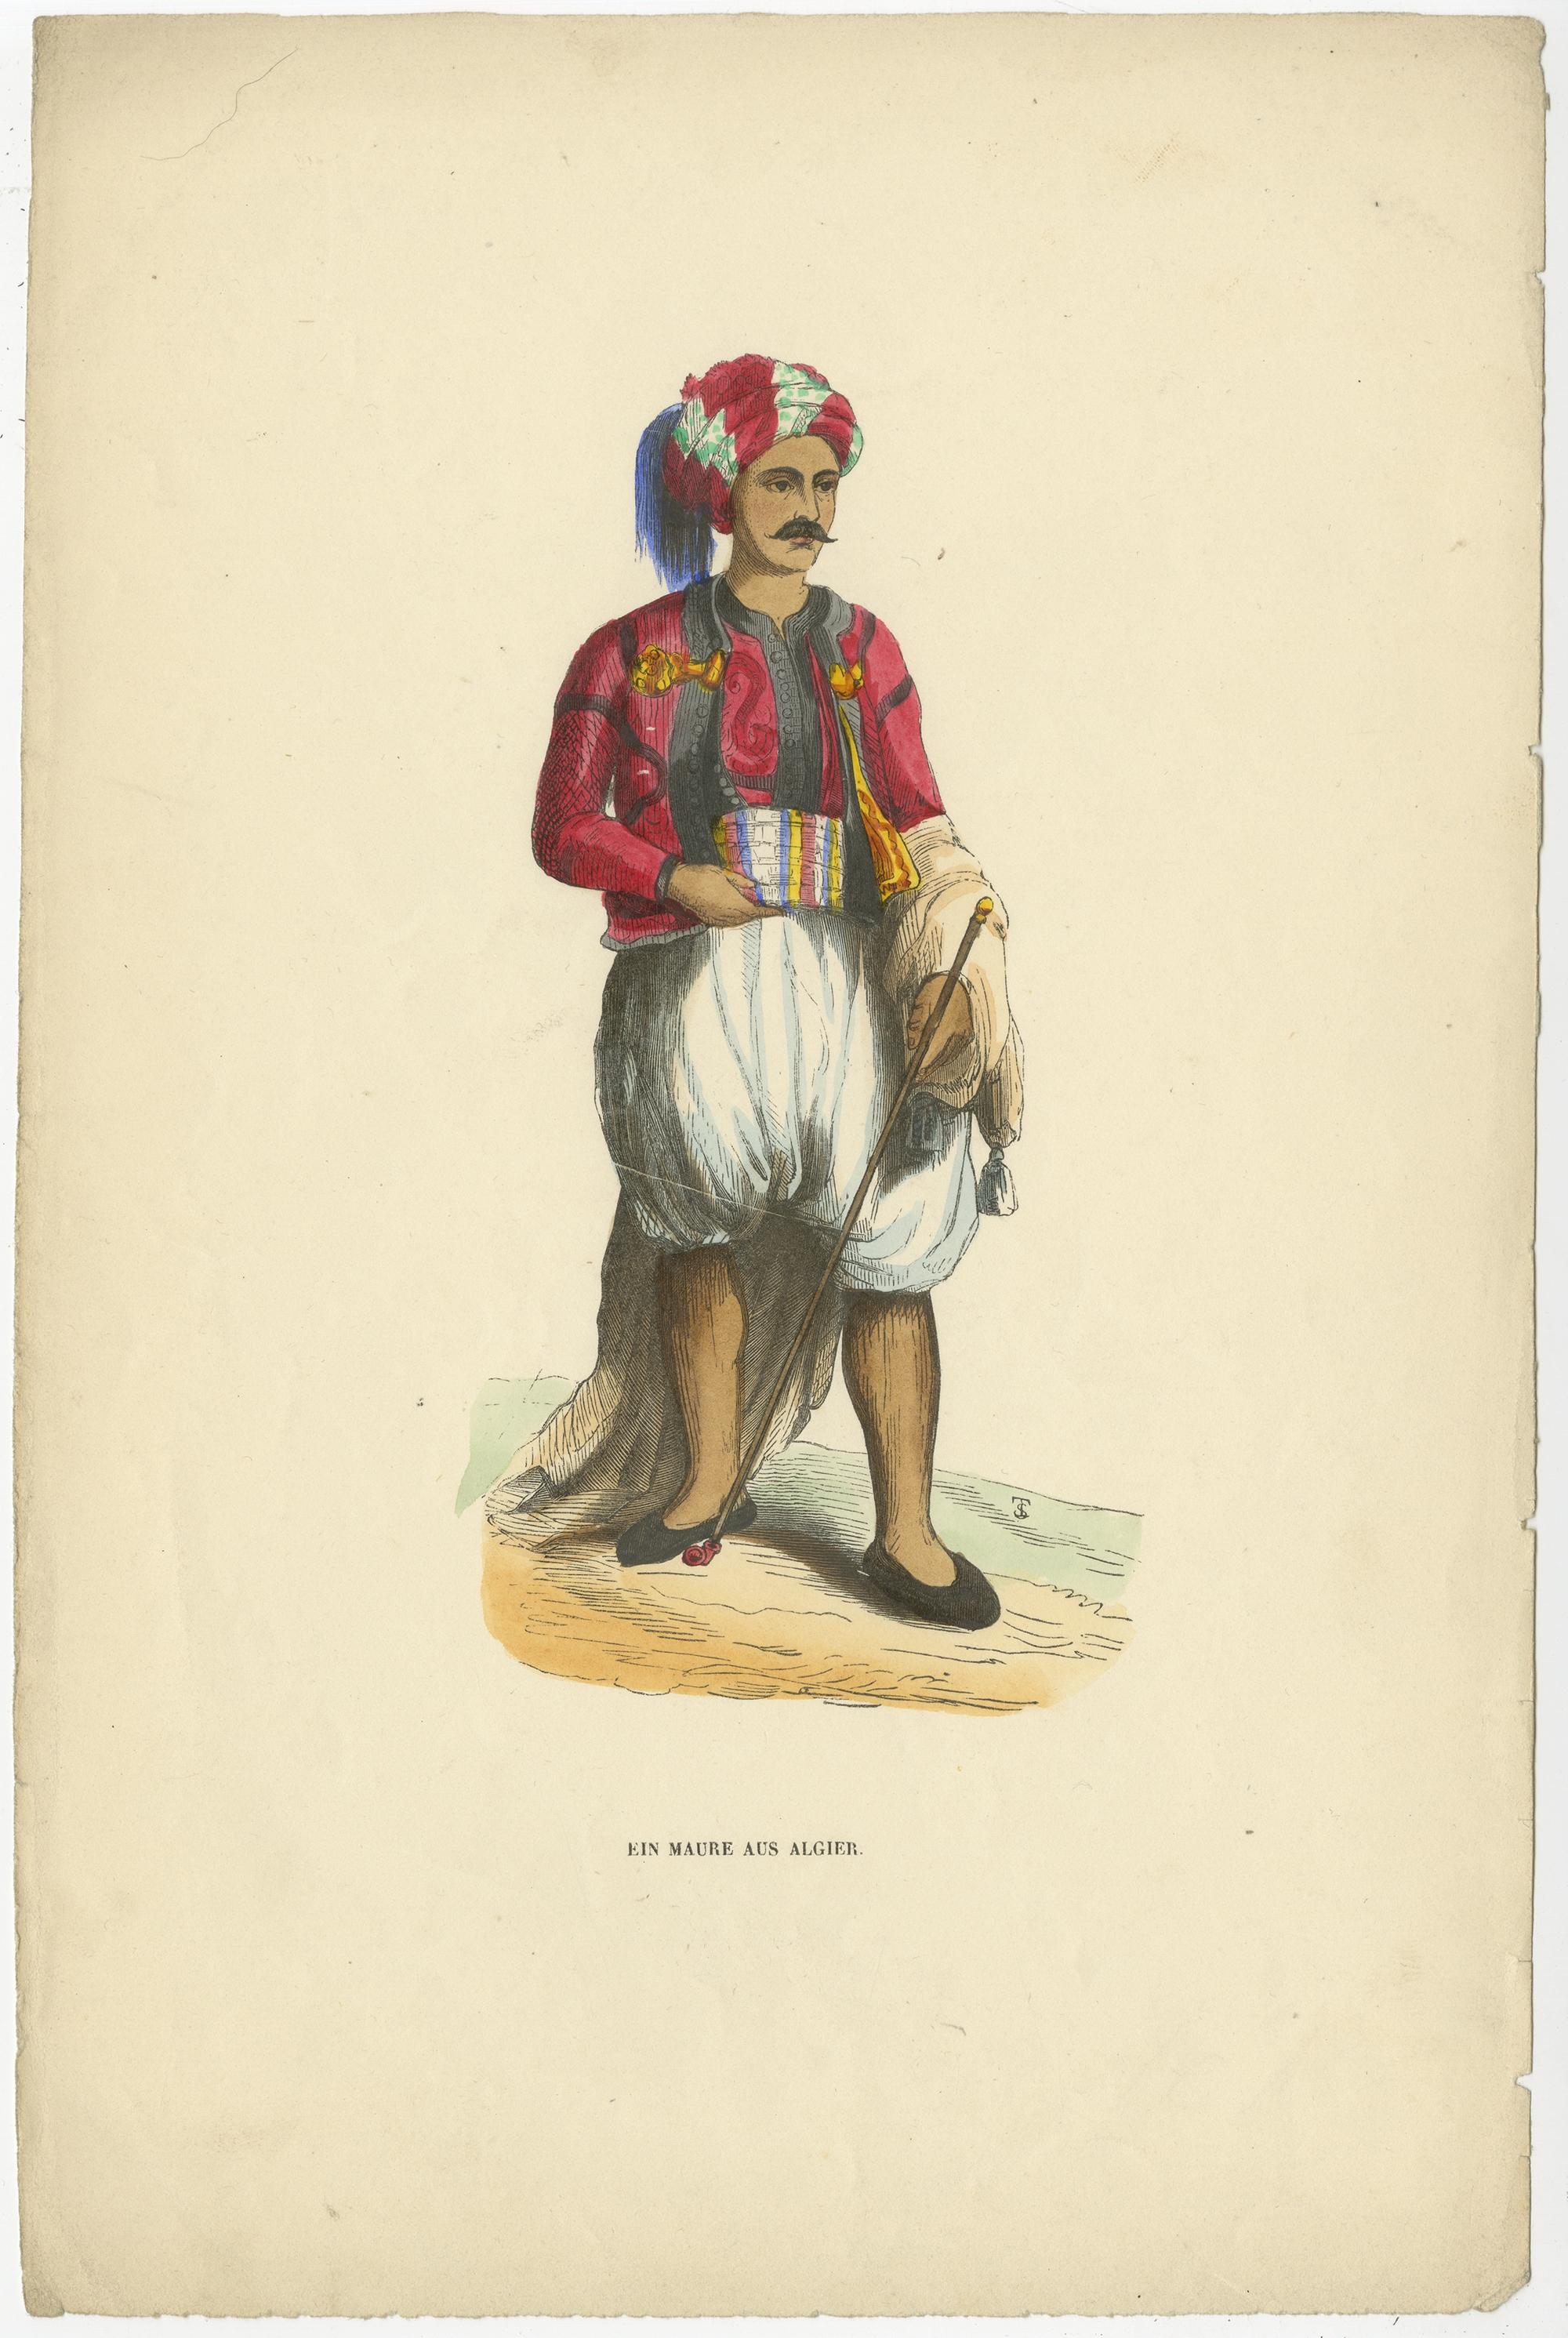 Antique print titled 'Ein Maure aus Algier'. 

Original antique print of a Moor from Algiers. This print originates from 'Die Volker des Erdballs (..)' by H. Berghaus. 

Artists and Engravers: Berghaus was a professor at Berlin and Potsdam who